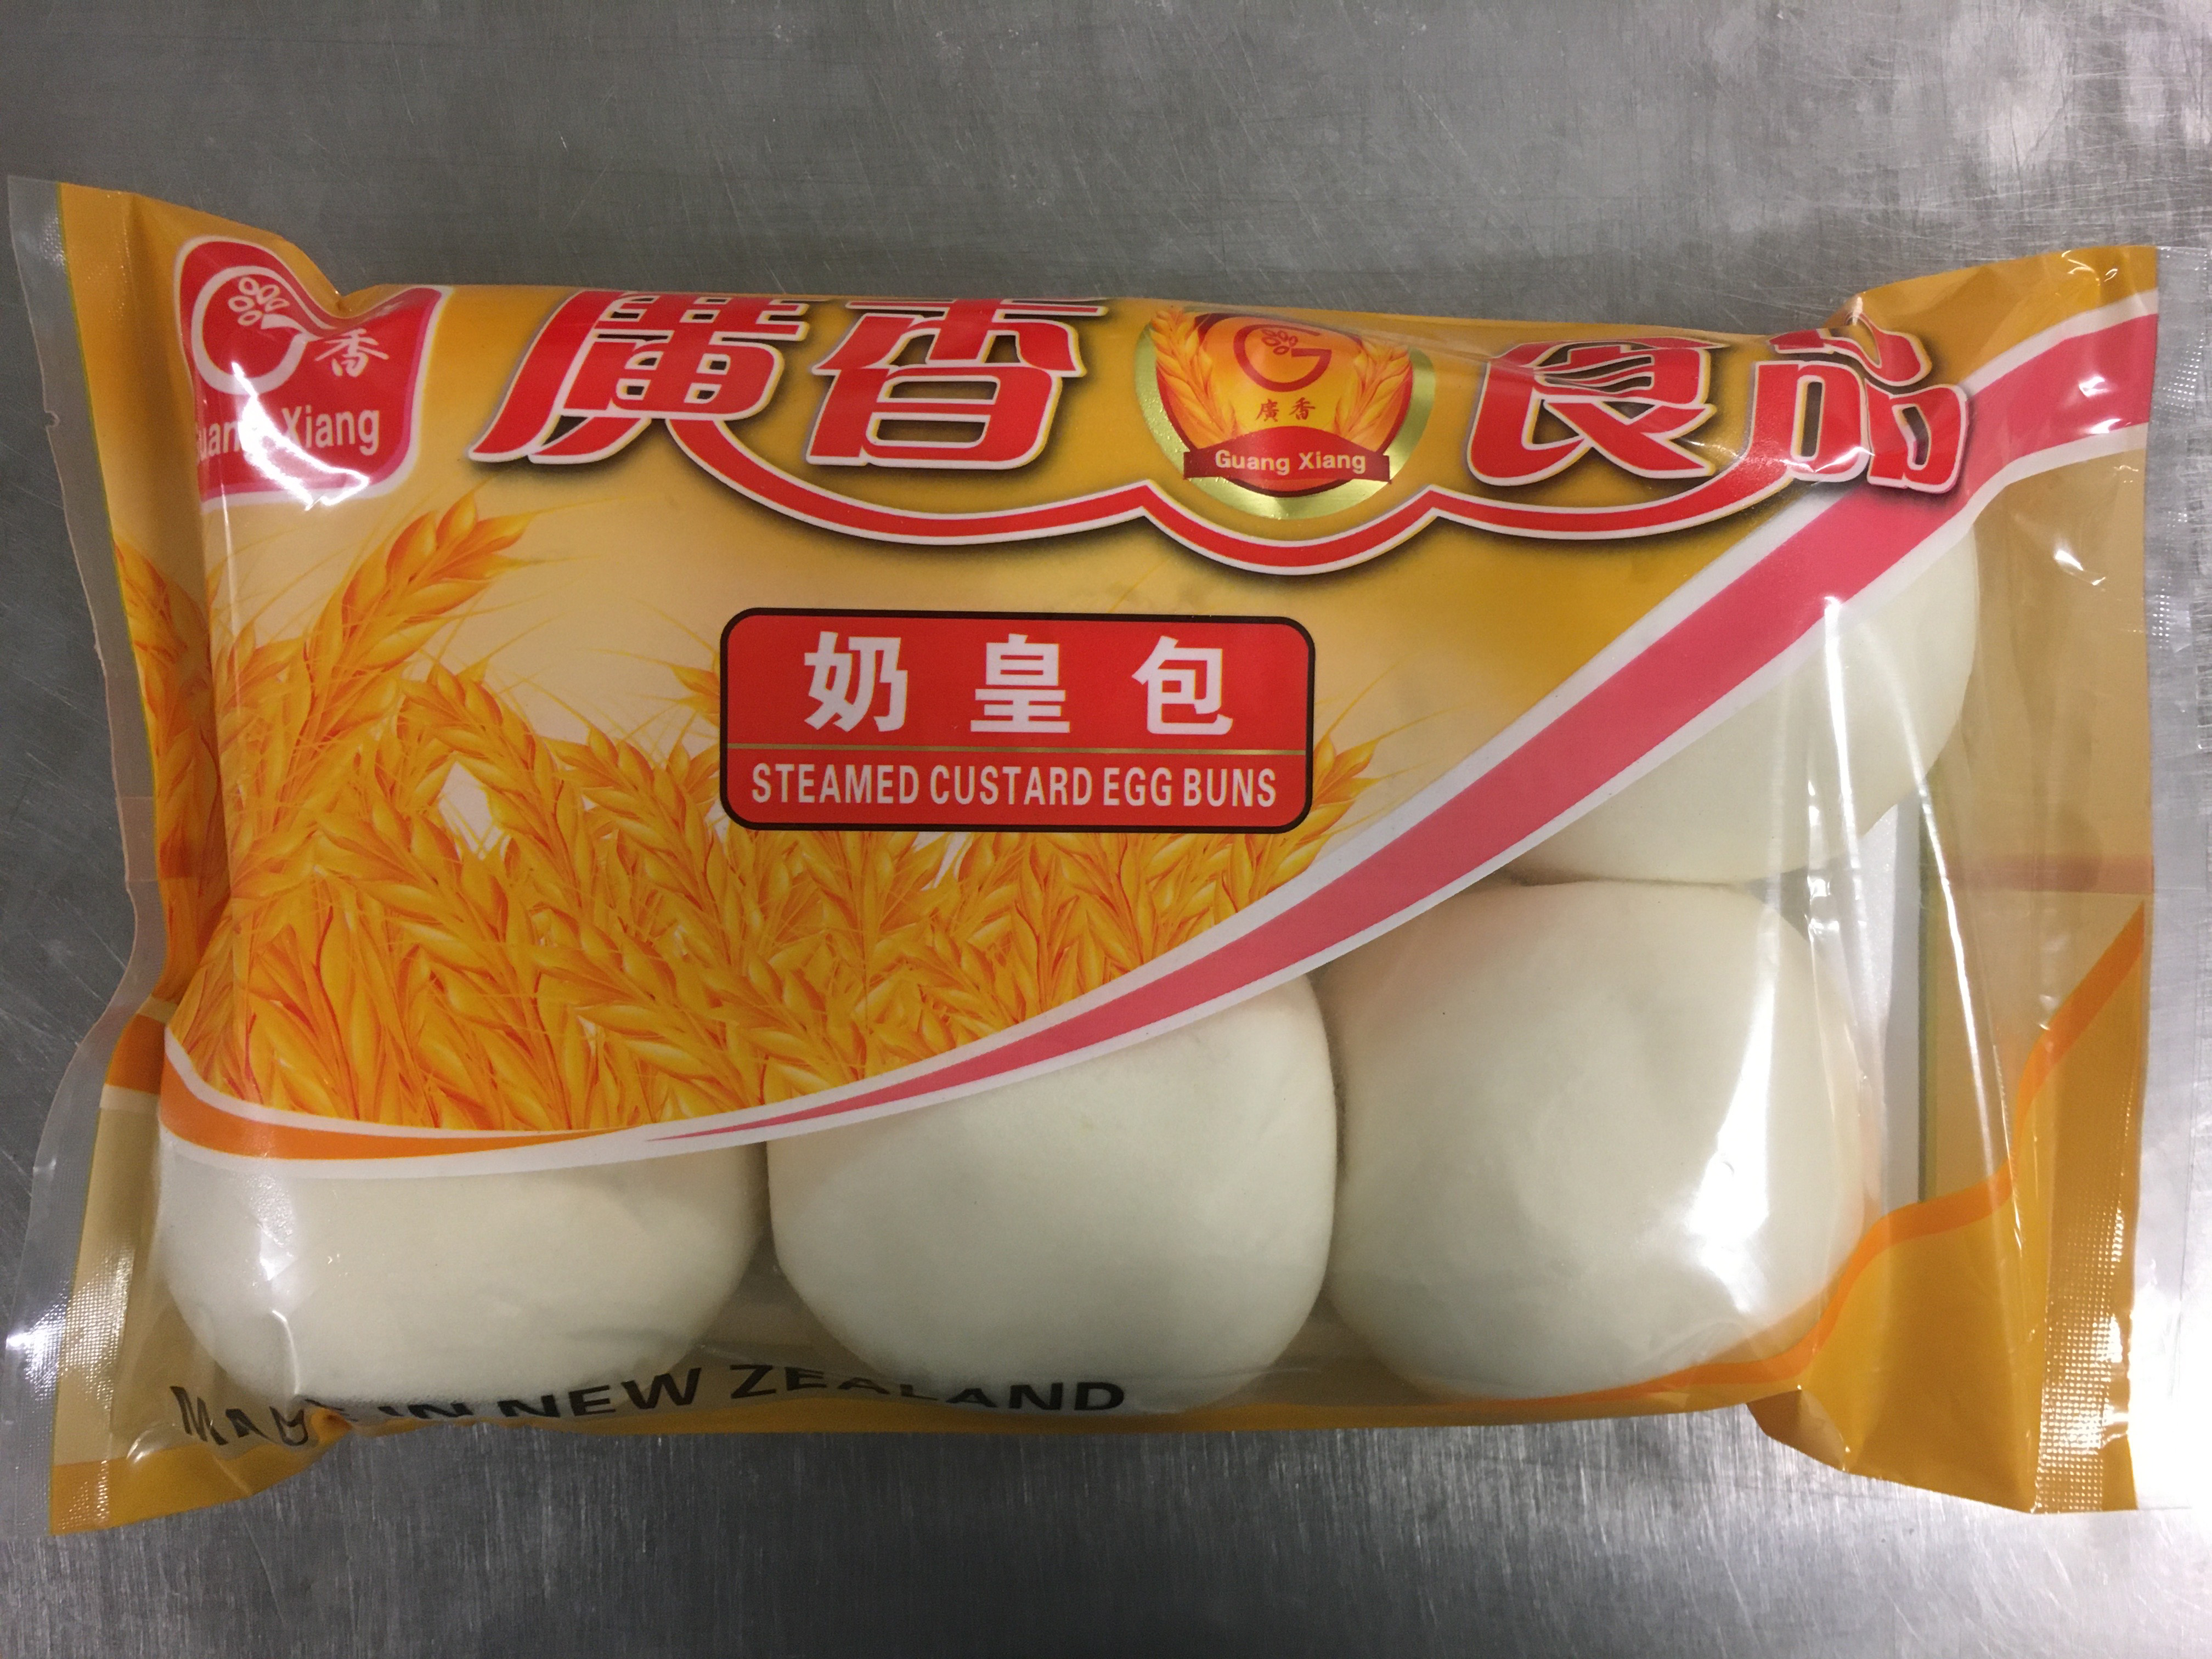 Image of Guangxiang brand Steamed Custard Egg Buns (522g) in a plasti pack